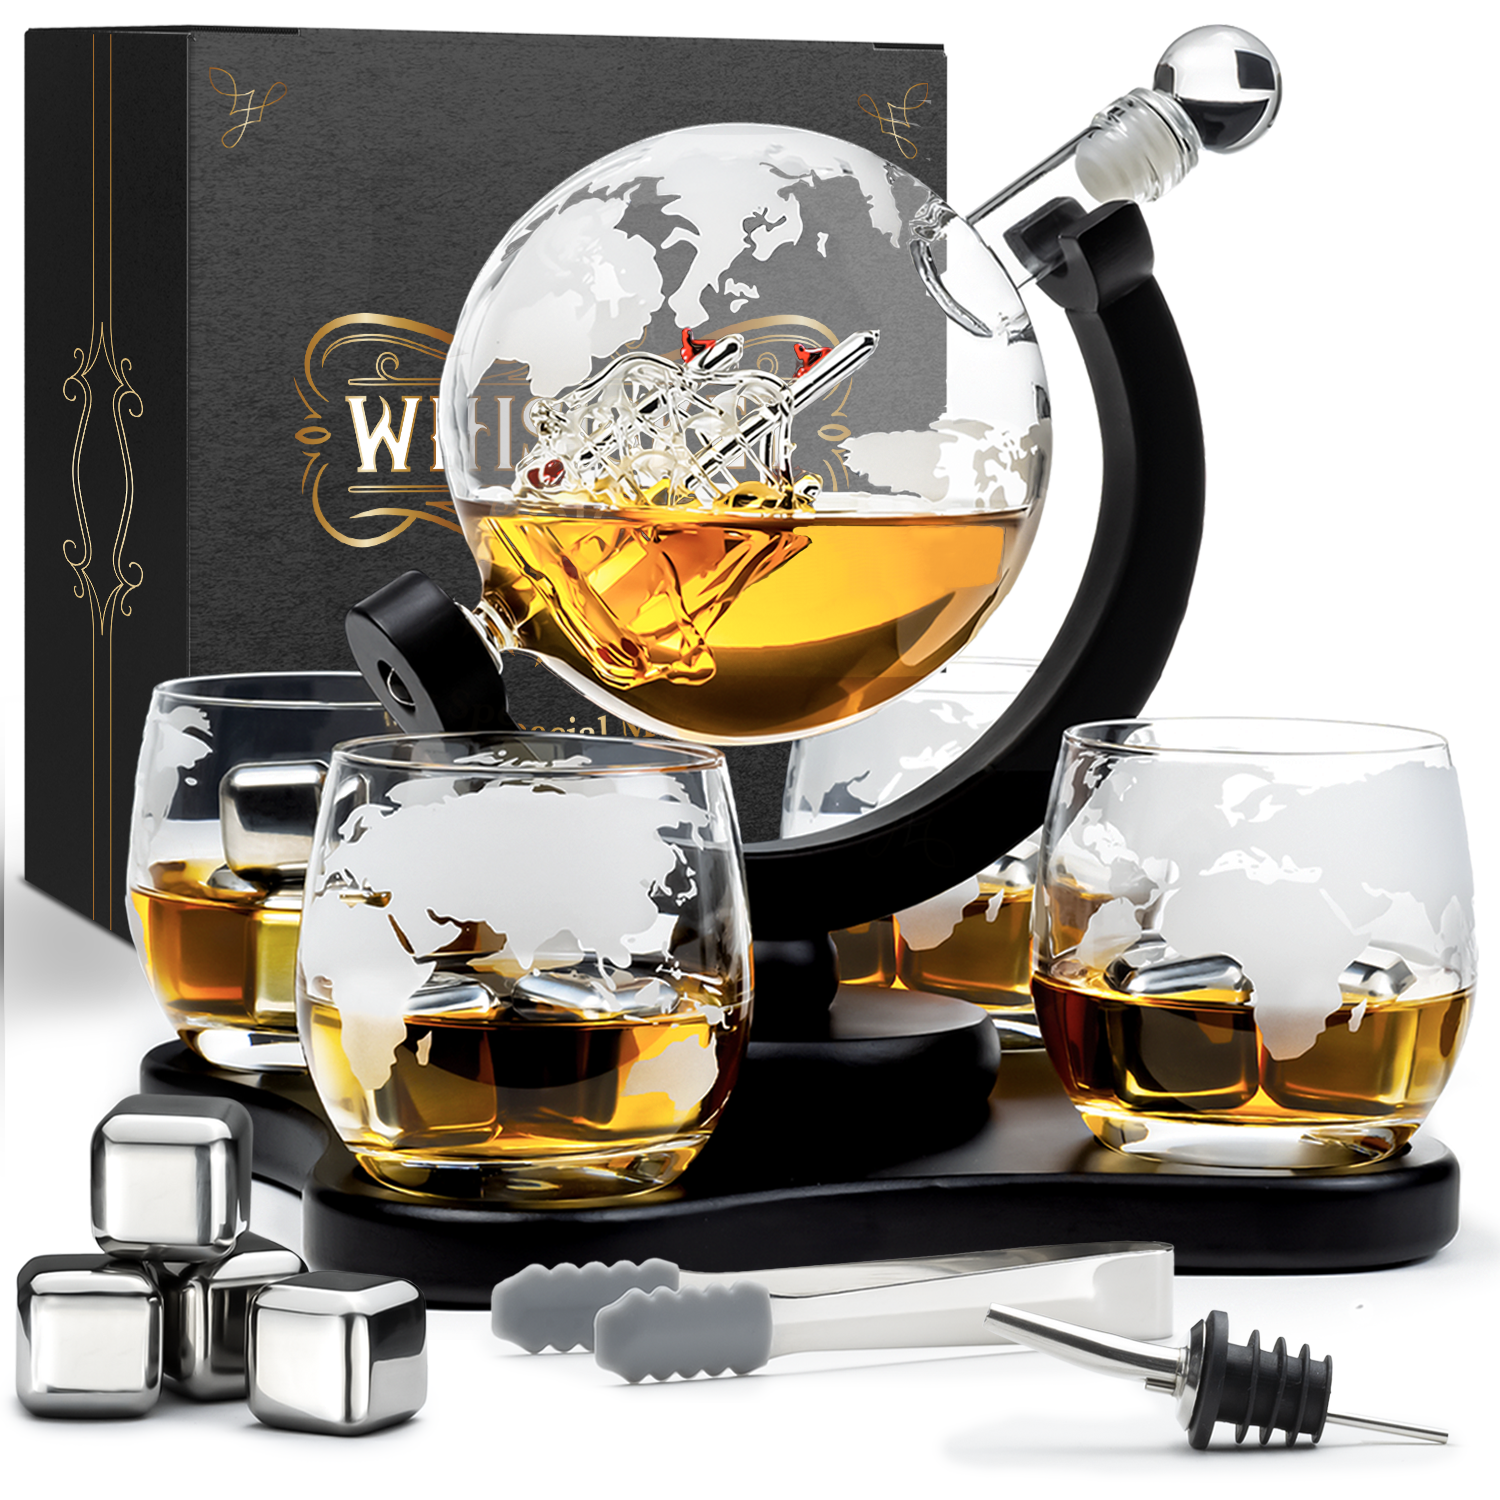 The Grand Explorer - Whisiskey Decanter Decanters Decanters Whisiskey